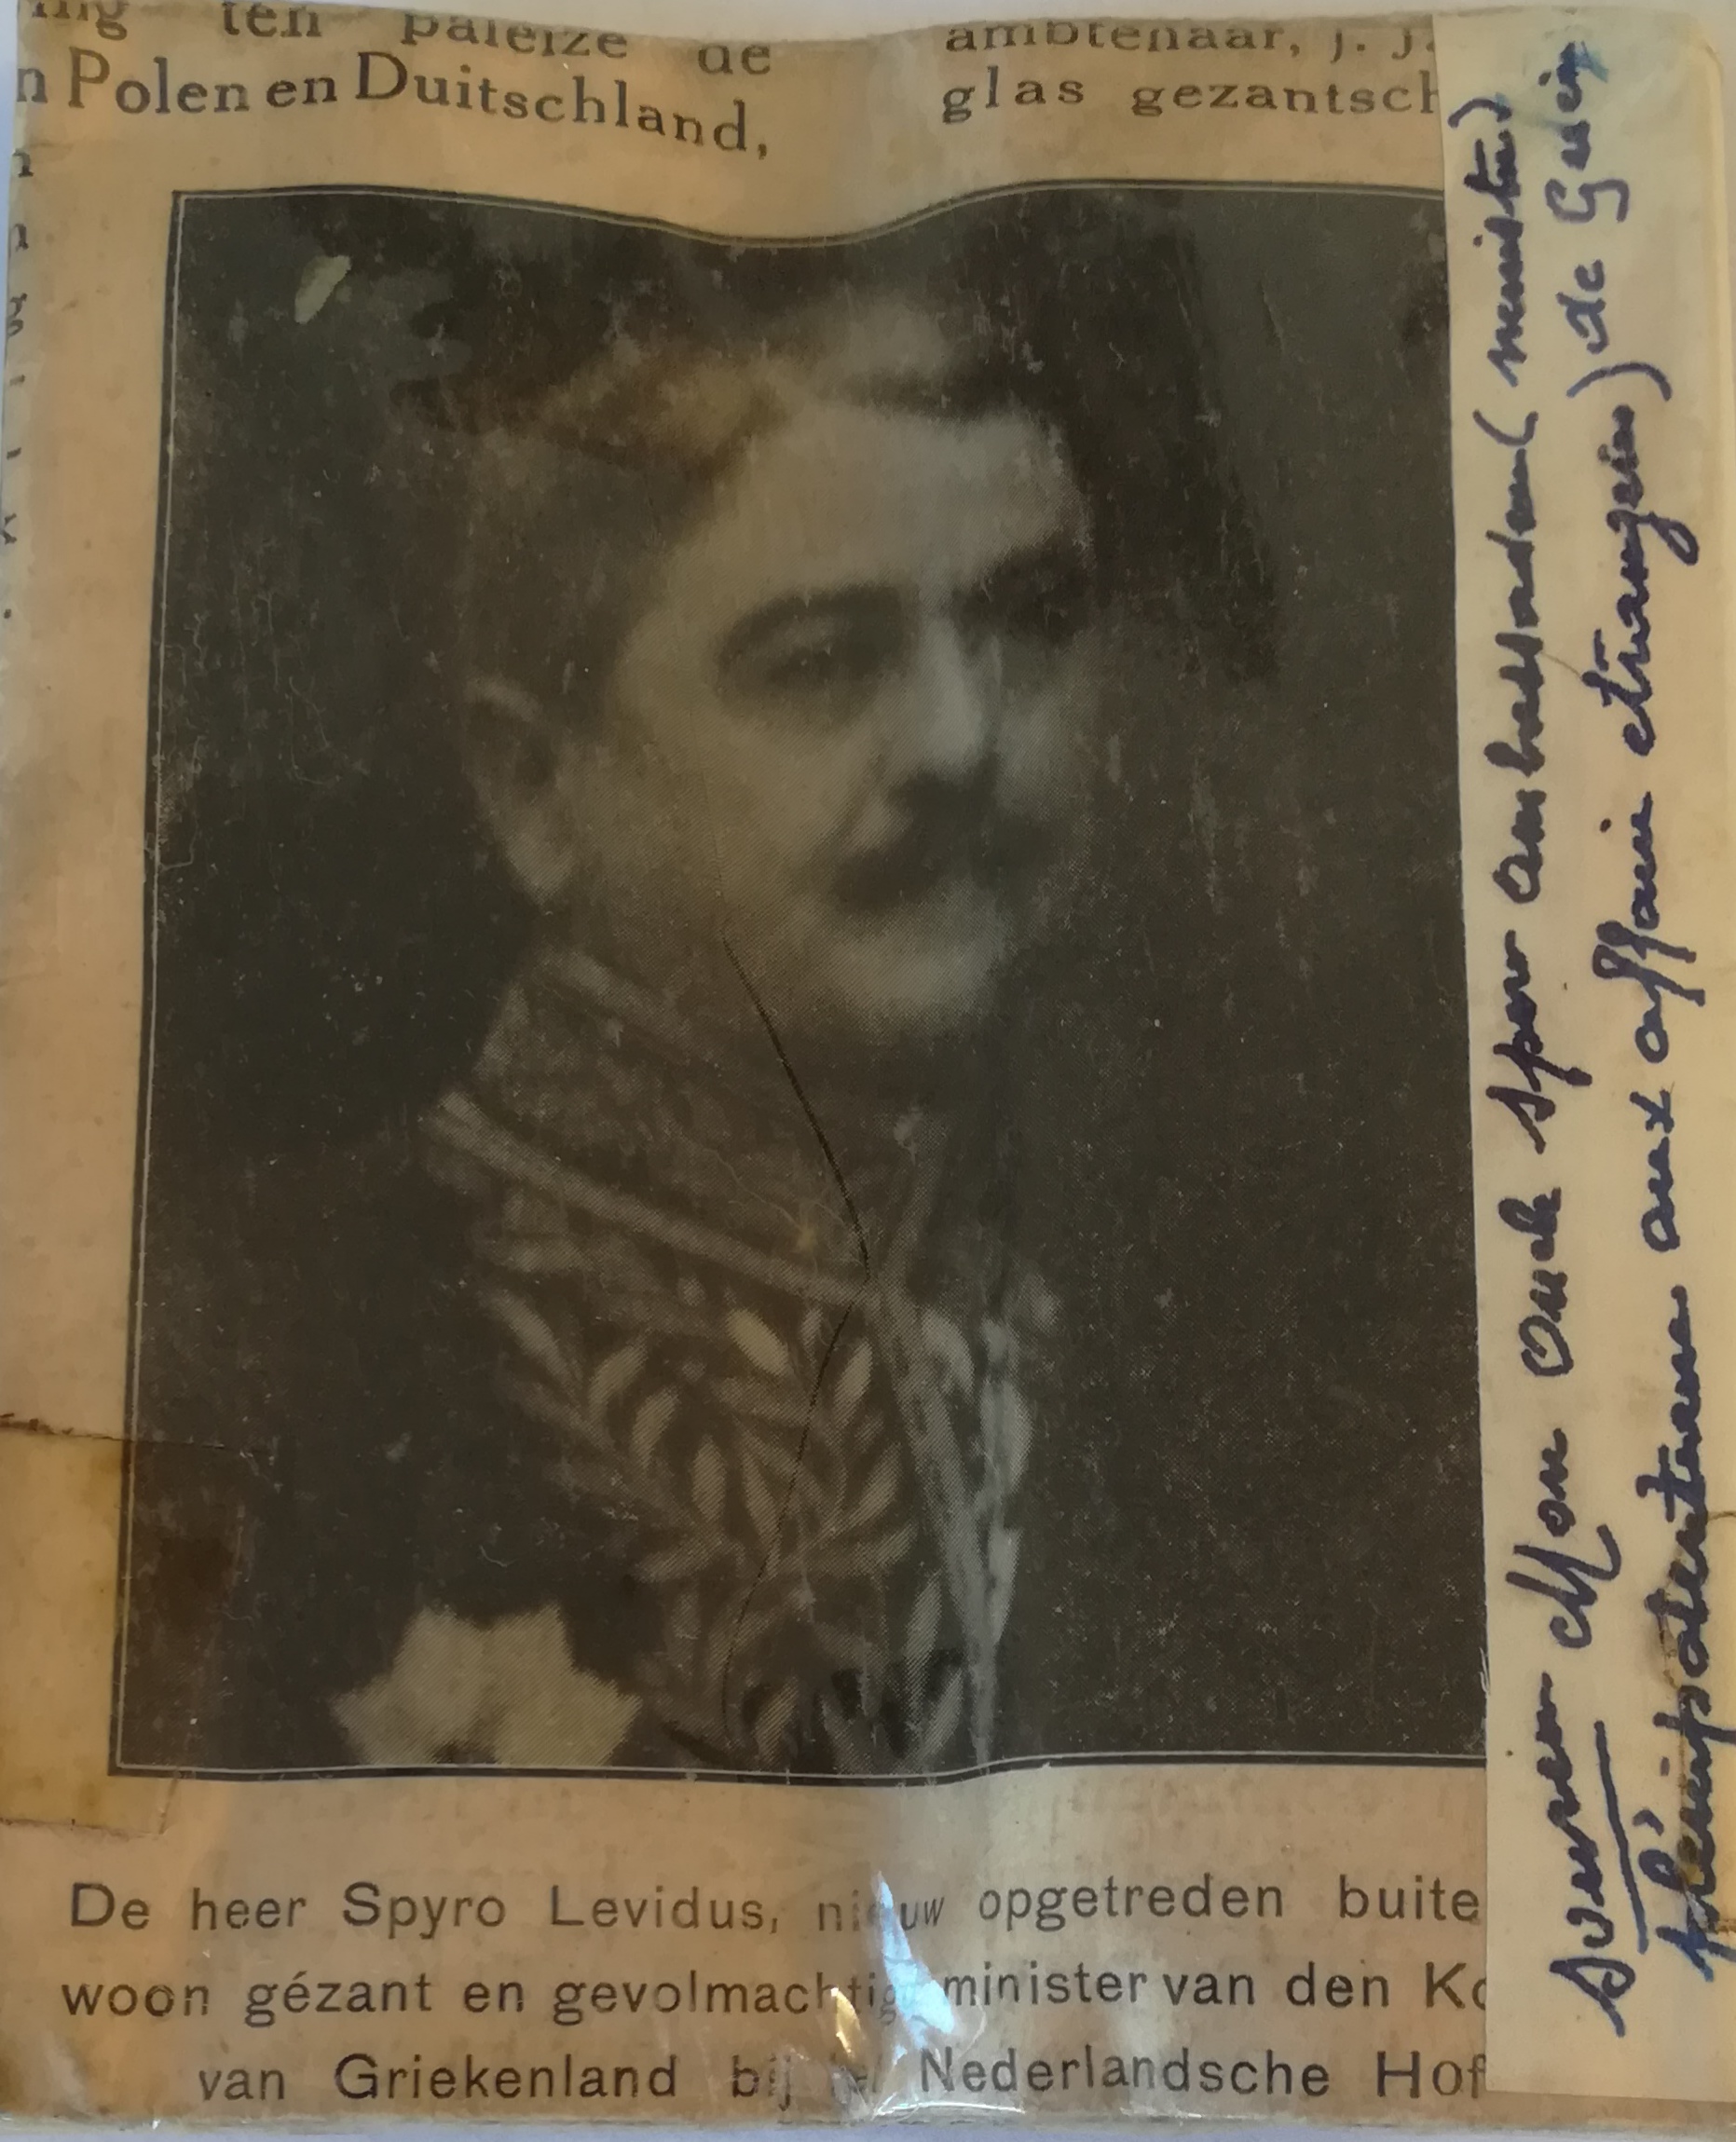 Photo of Spyro Levidus, Foreign Affairs Minister of Greece